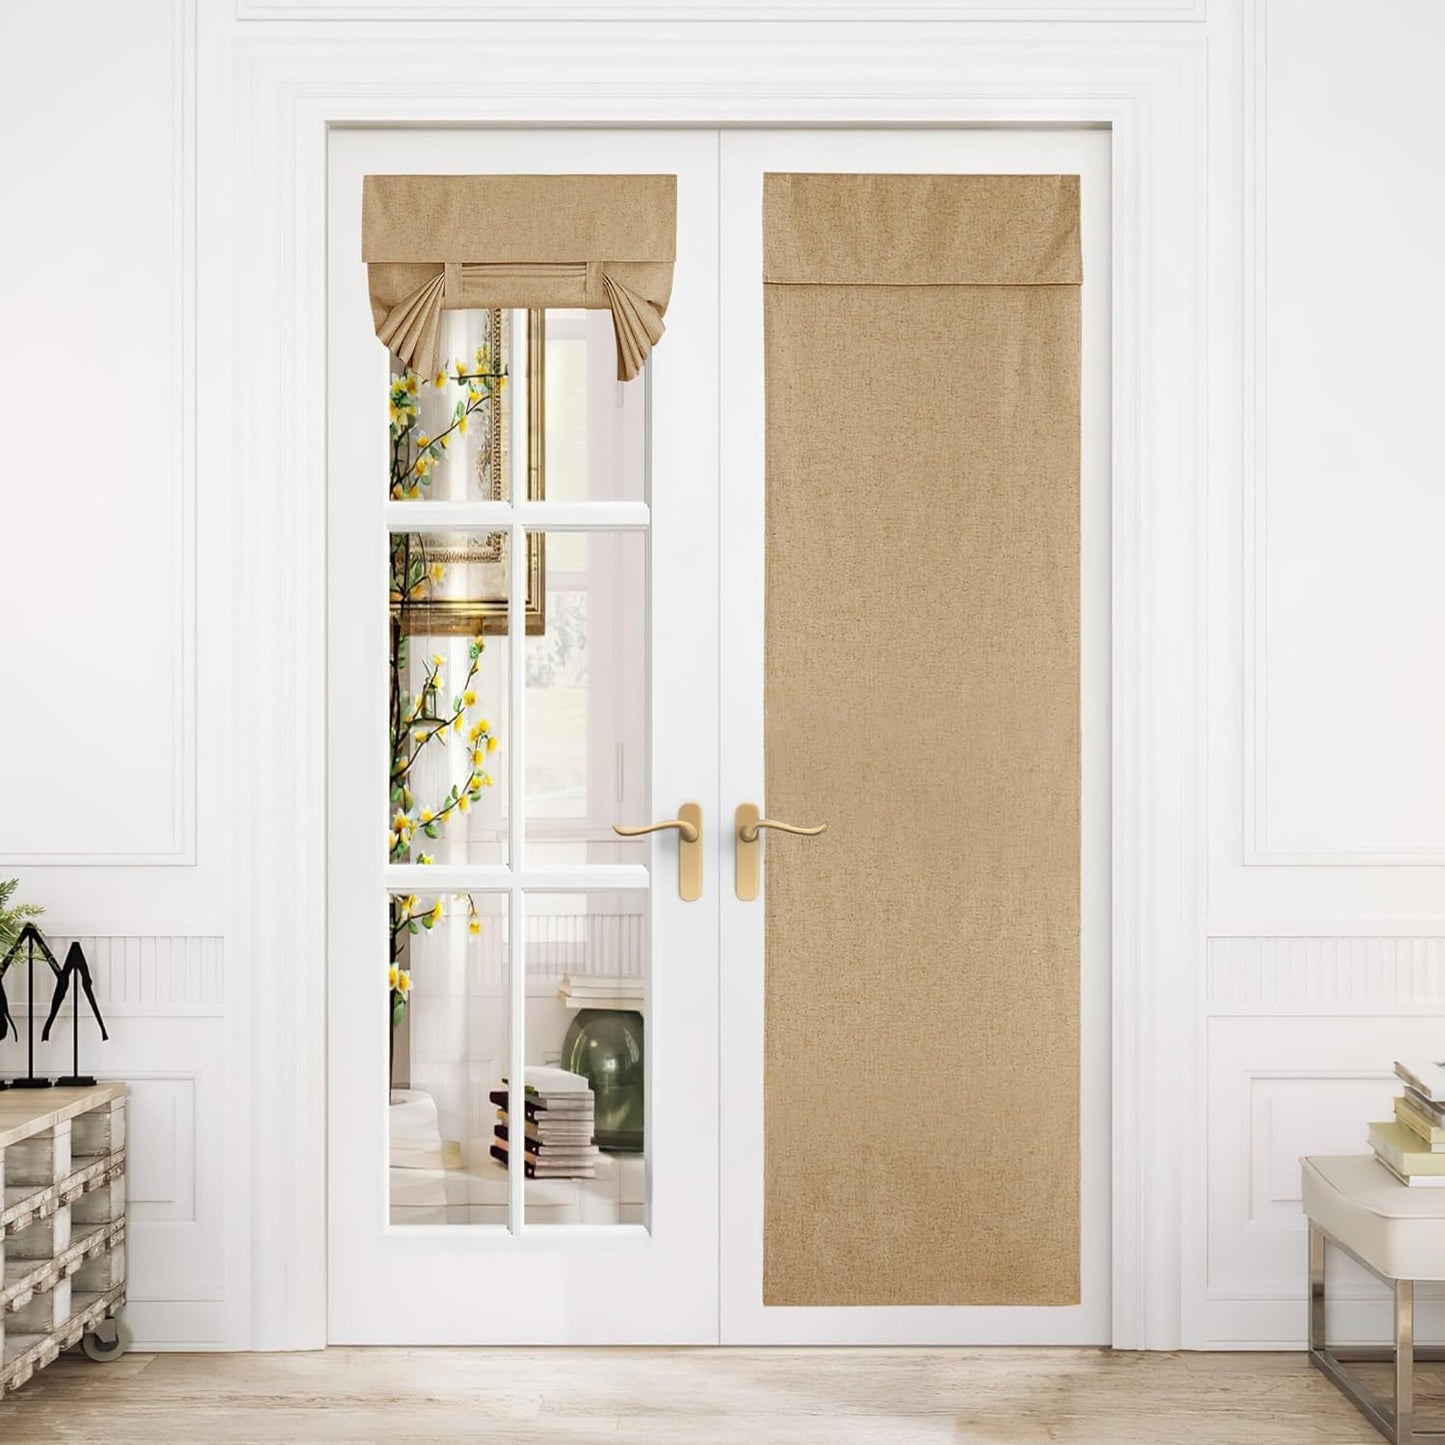 NICETOWN Linen Door Curtain for Door Window, Farmhouse French Door Curtain Shade for Kitchen Bathroom Energy Saving 100% Blackout Tie up Shade for Patio Sliding Glass, 1 Panel, Natural, 26" W X 72" L  NICETOWN Camel W26 X L80 